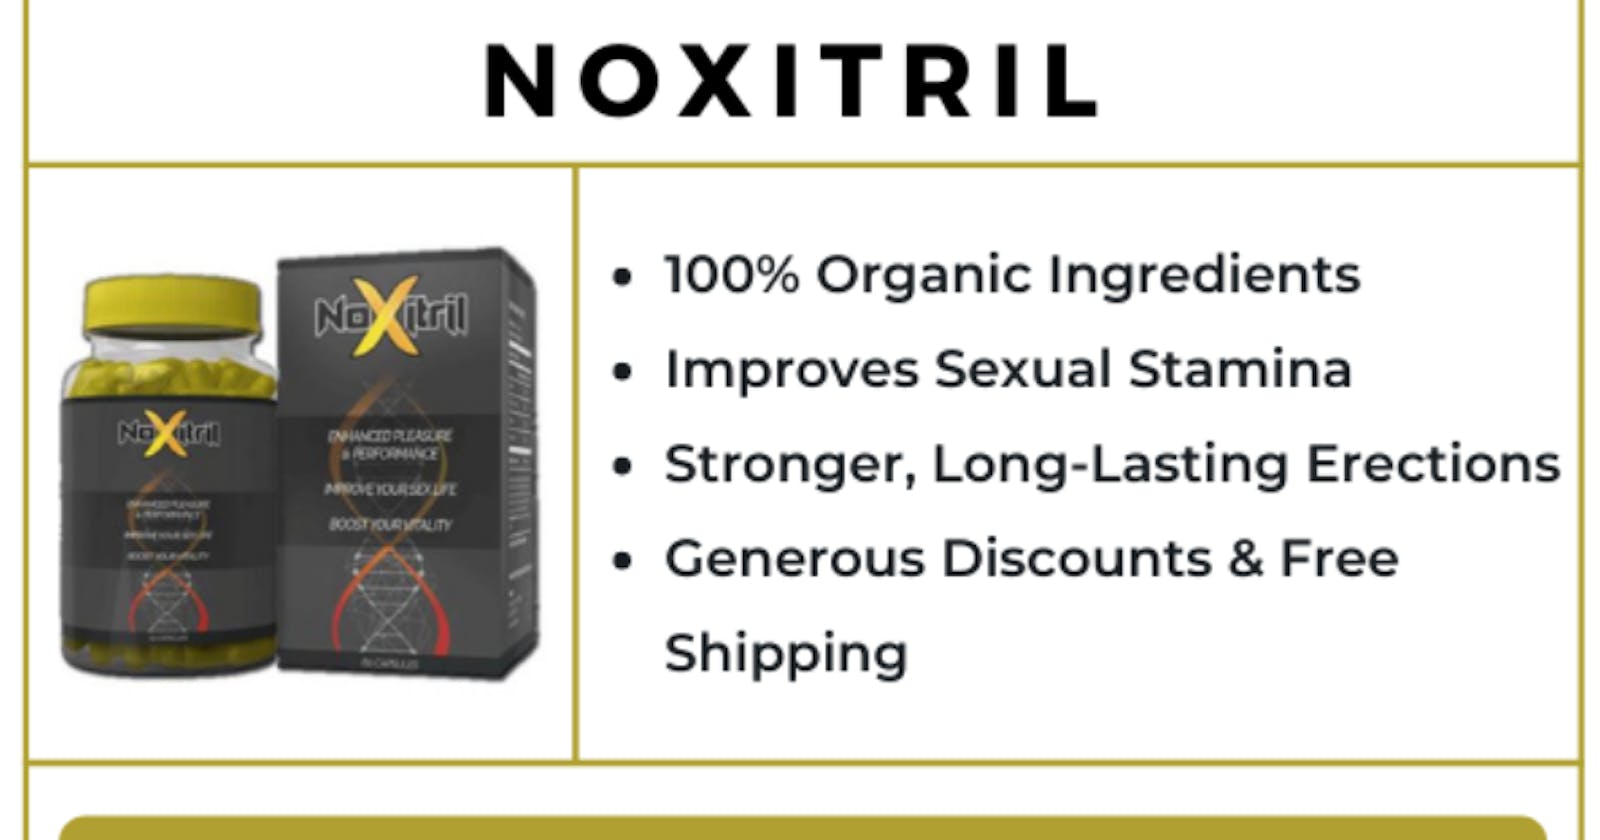 Noxitril Male Enhancement: Testosterone Booster That Works or a Waste of Money? 15 Days Results